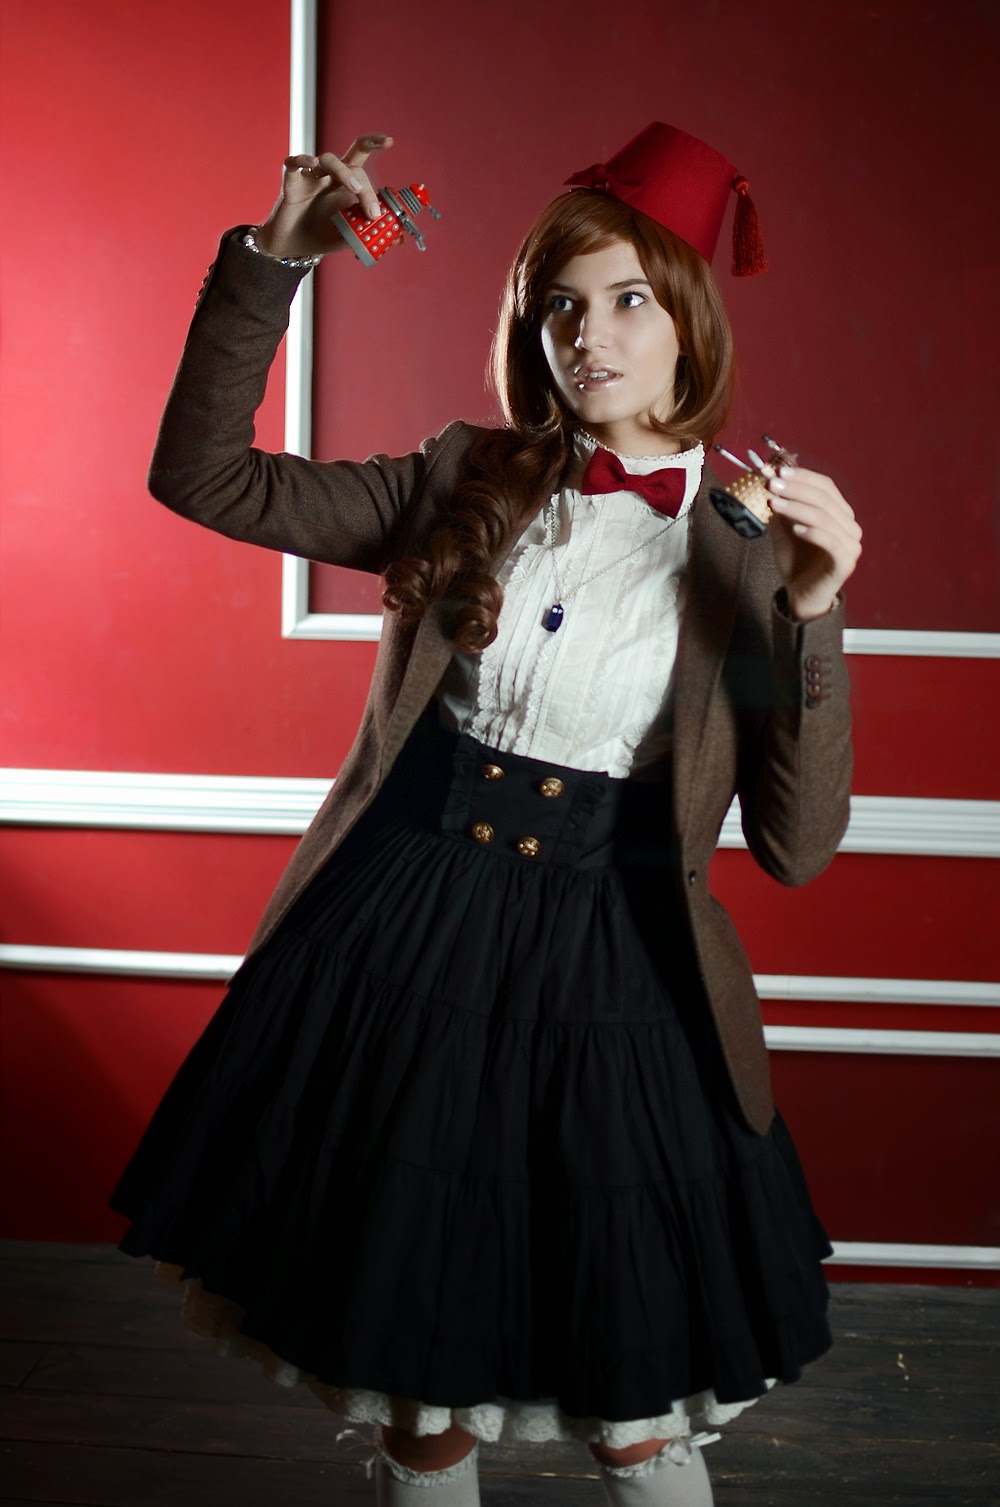 11th doctor cosplay female